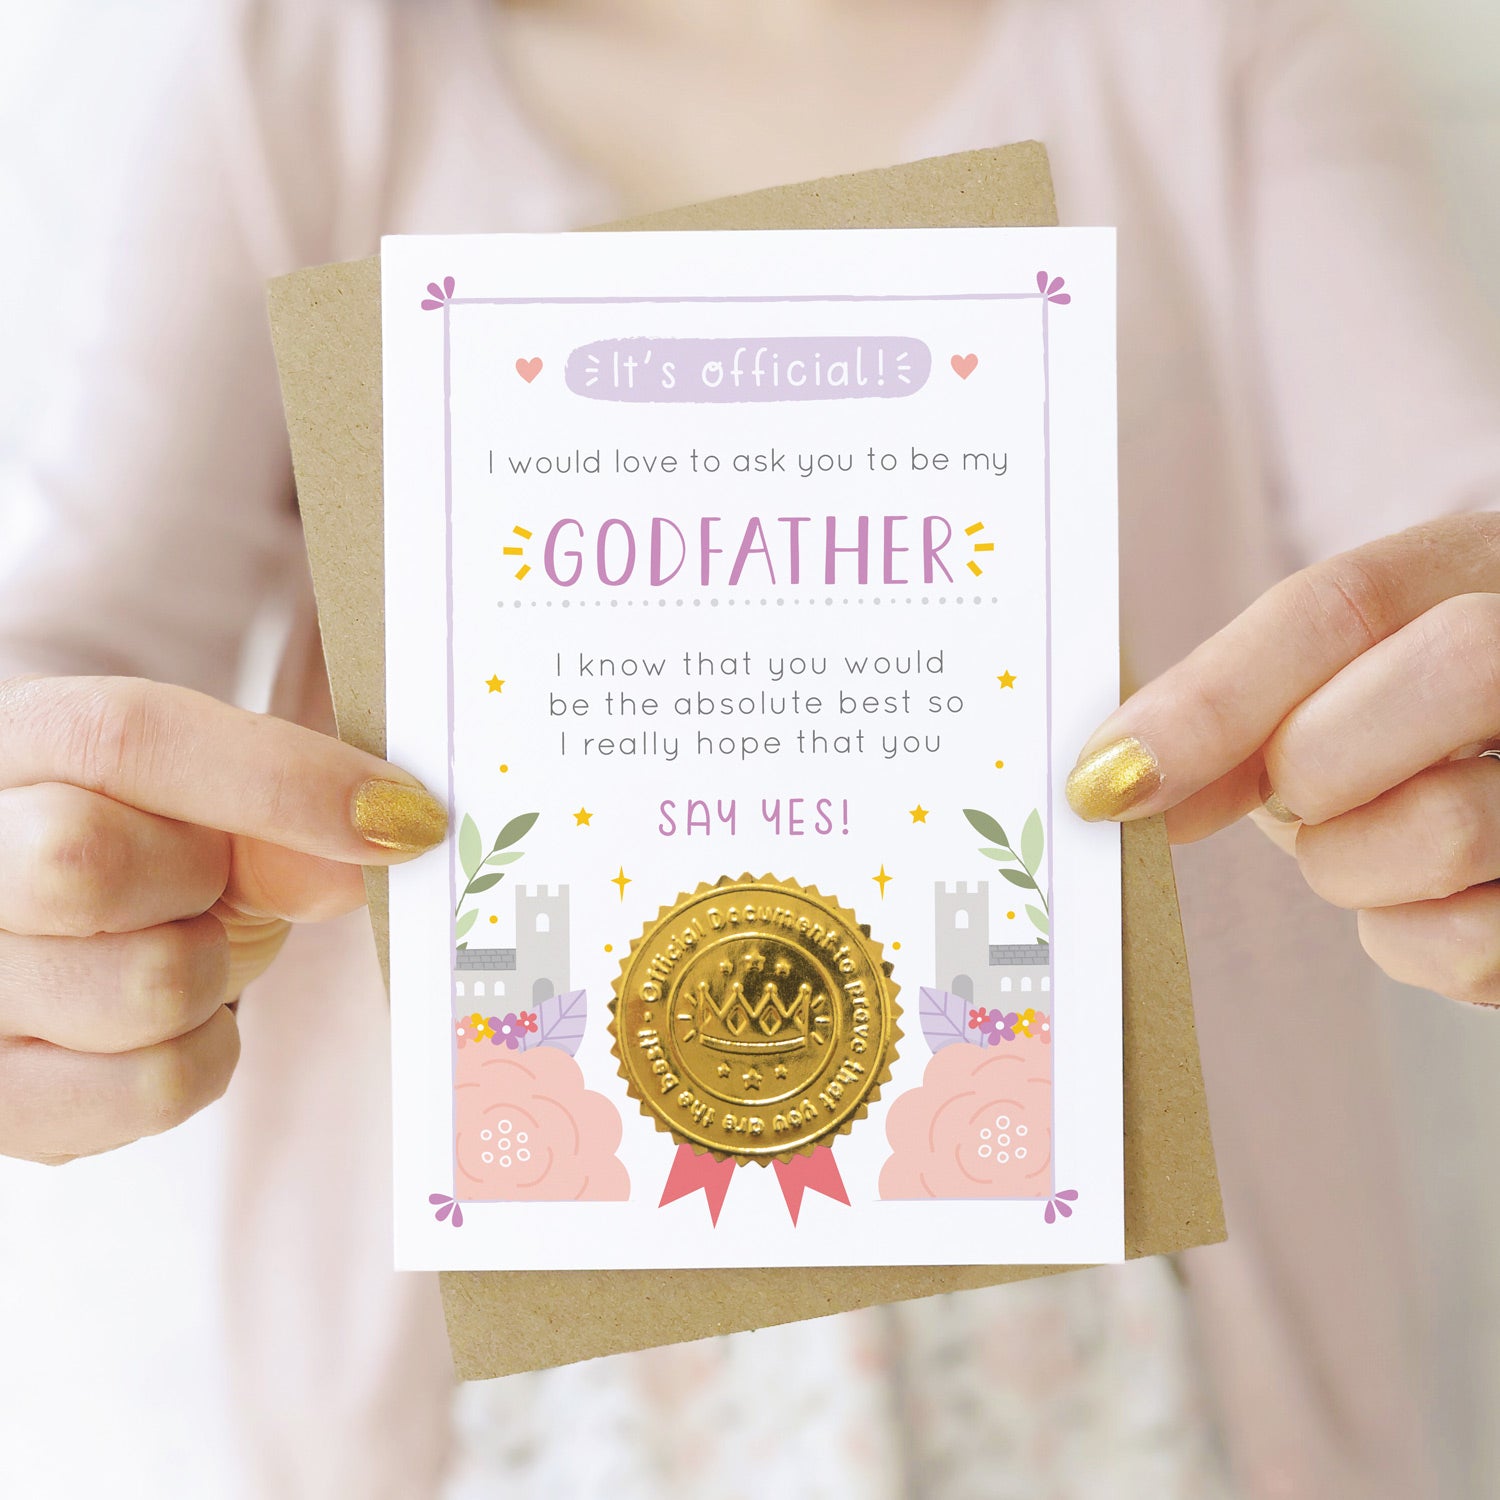 A will you be my godfather card in purple and pink being held by both hands in front of a person wearing a pink cardigan and a white dress.